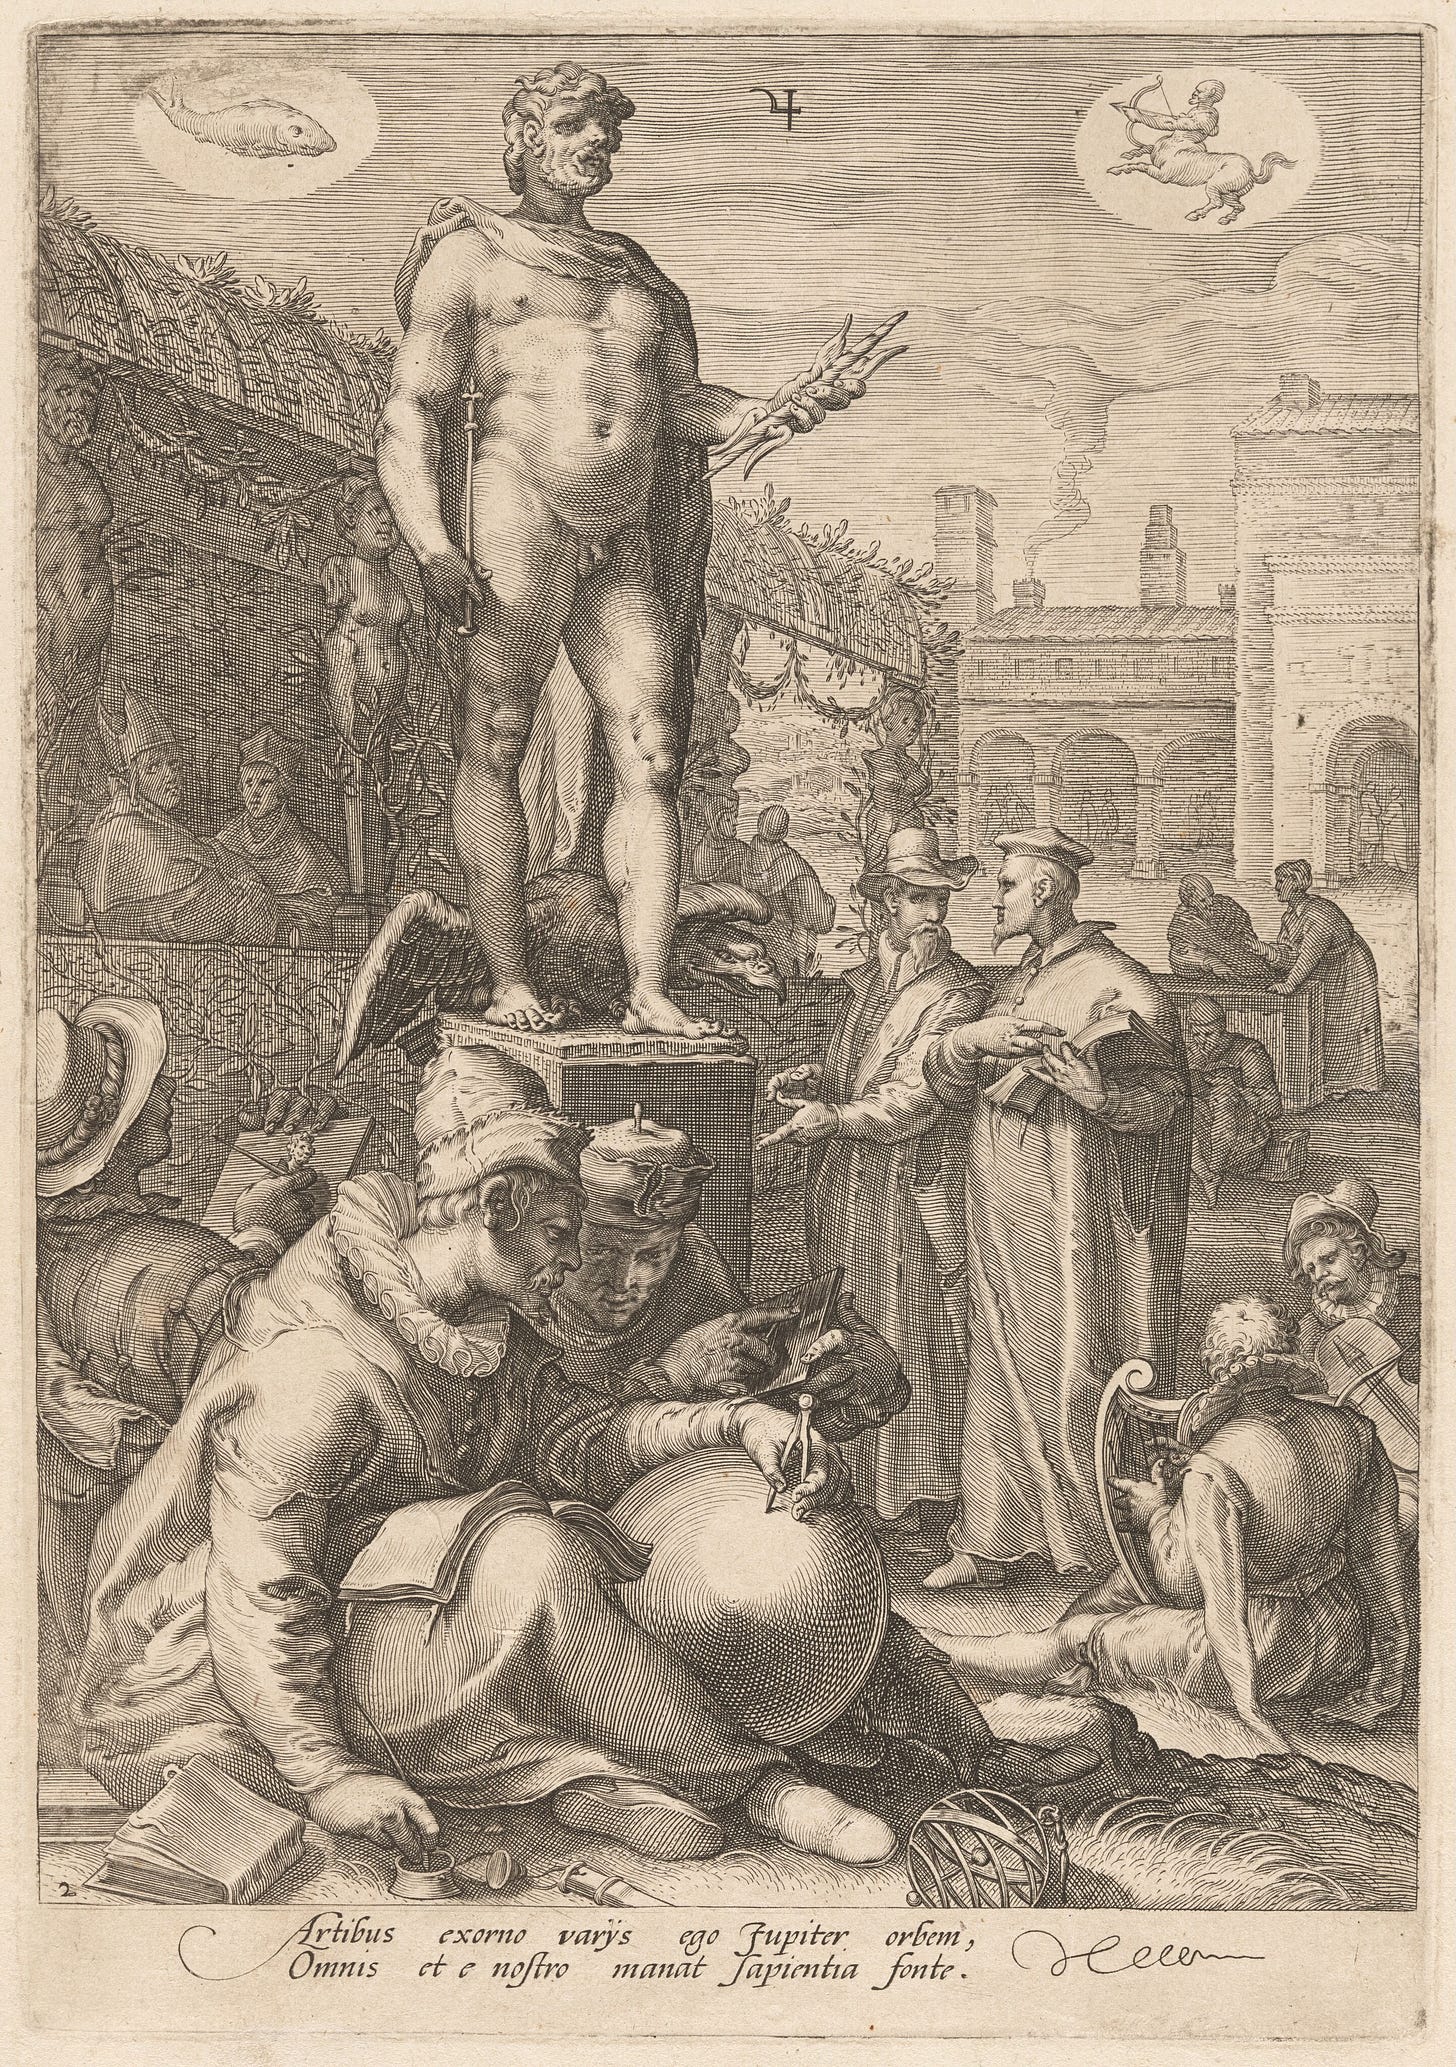 Engraving on laid paper artwork of Jupiter presiding over the liberal arts. Image from the National Gallery of Art.